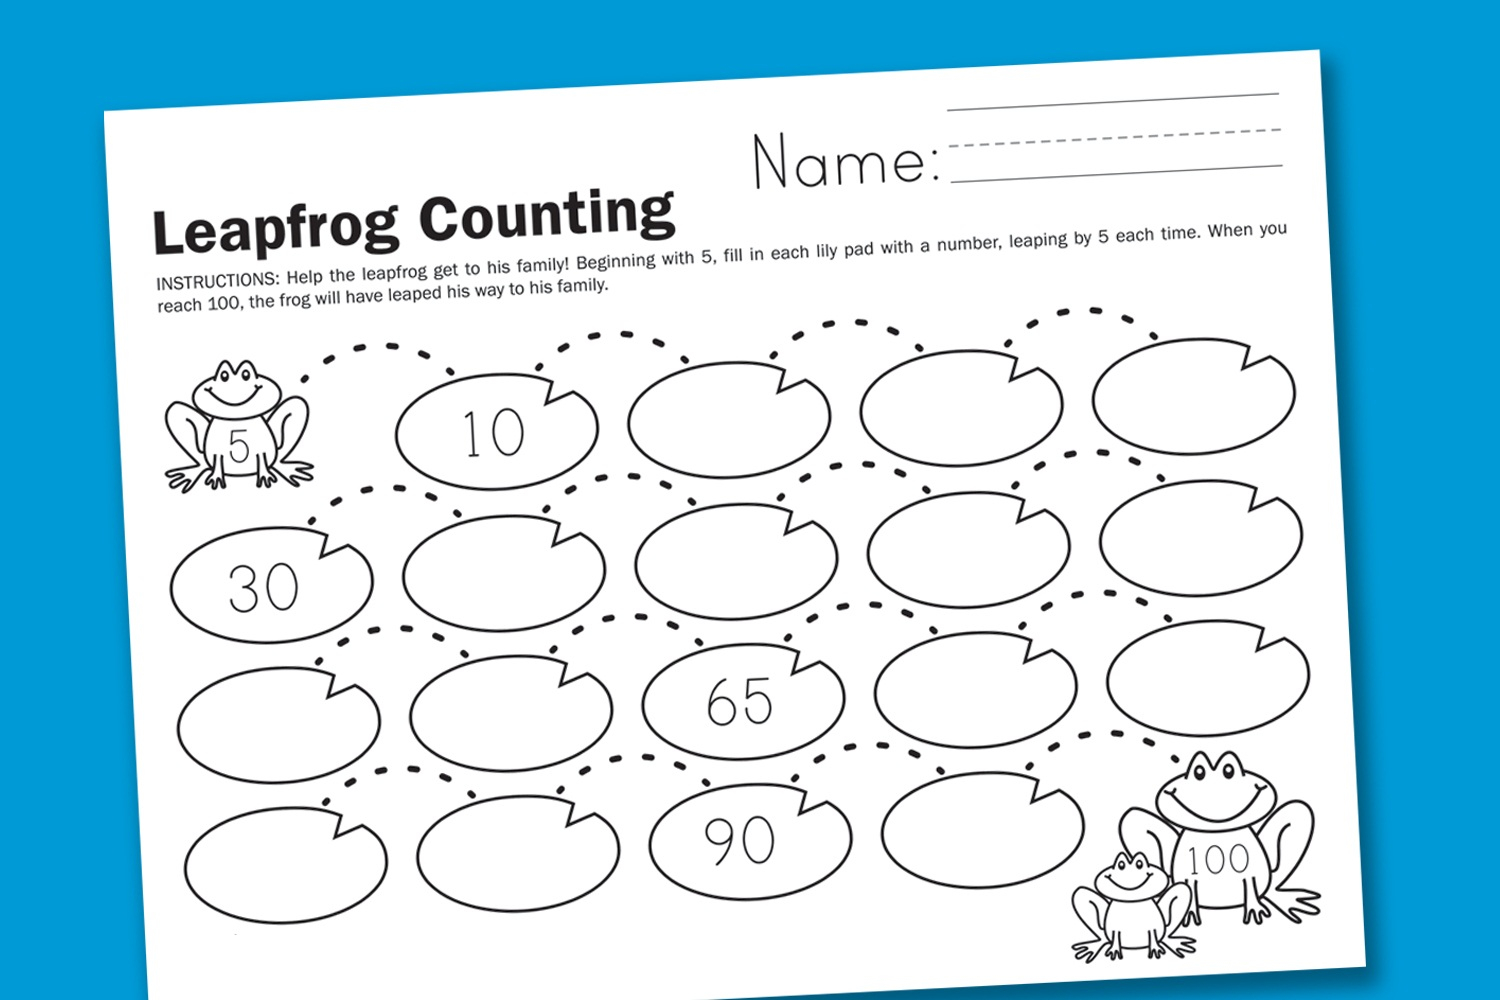 Count By 5s Worksheets Printable Activity Shelter